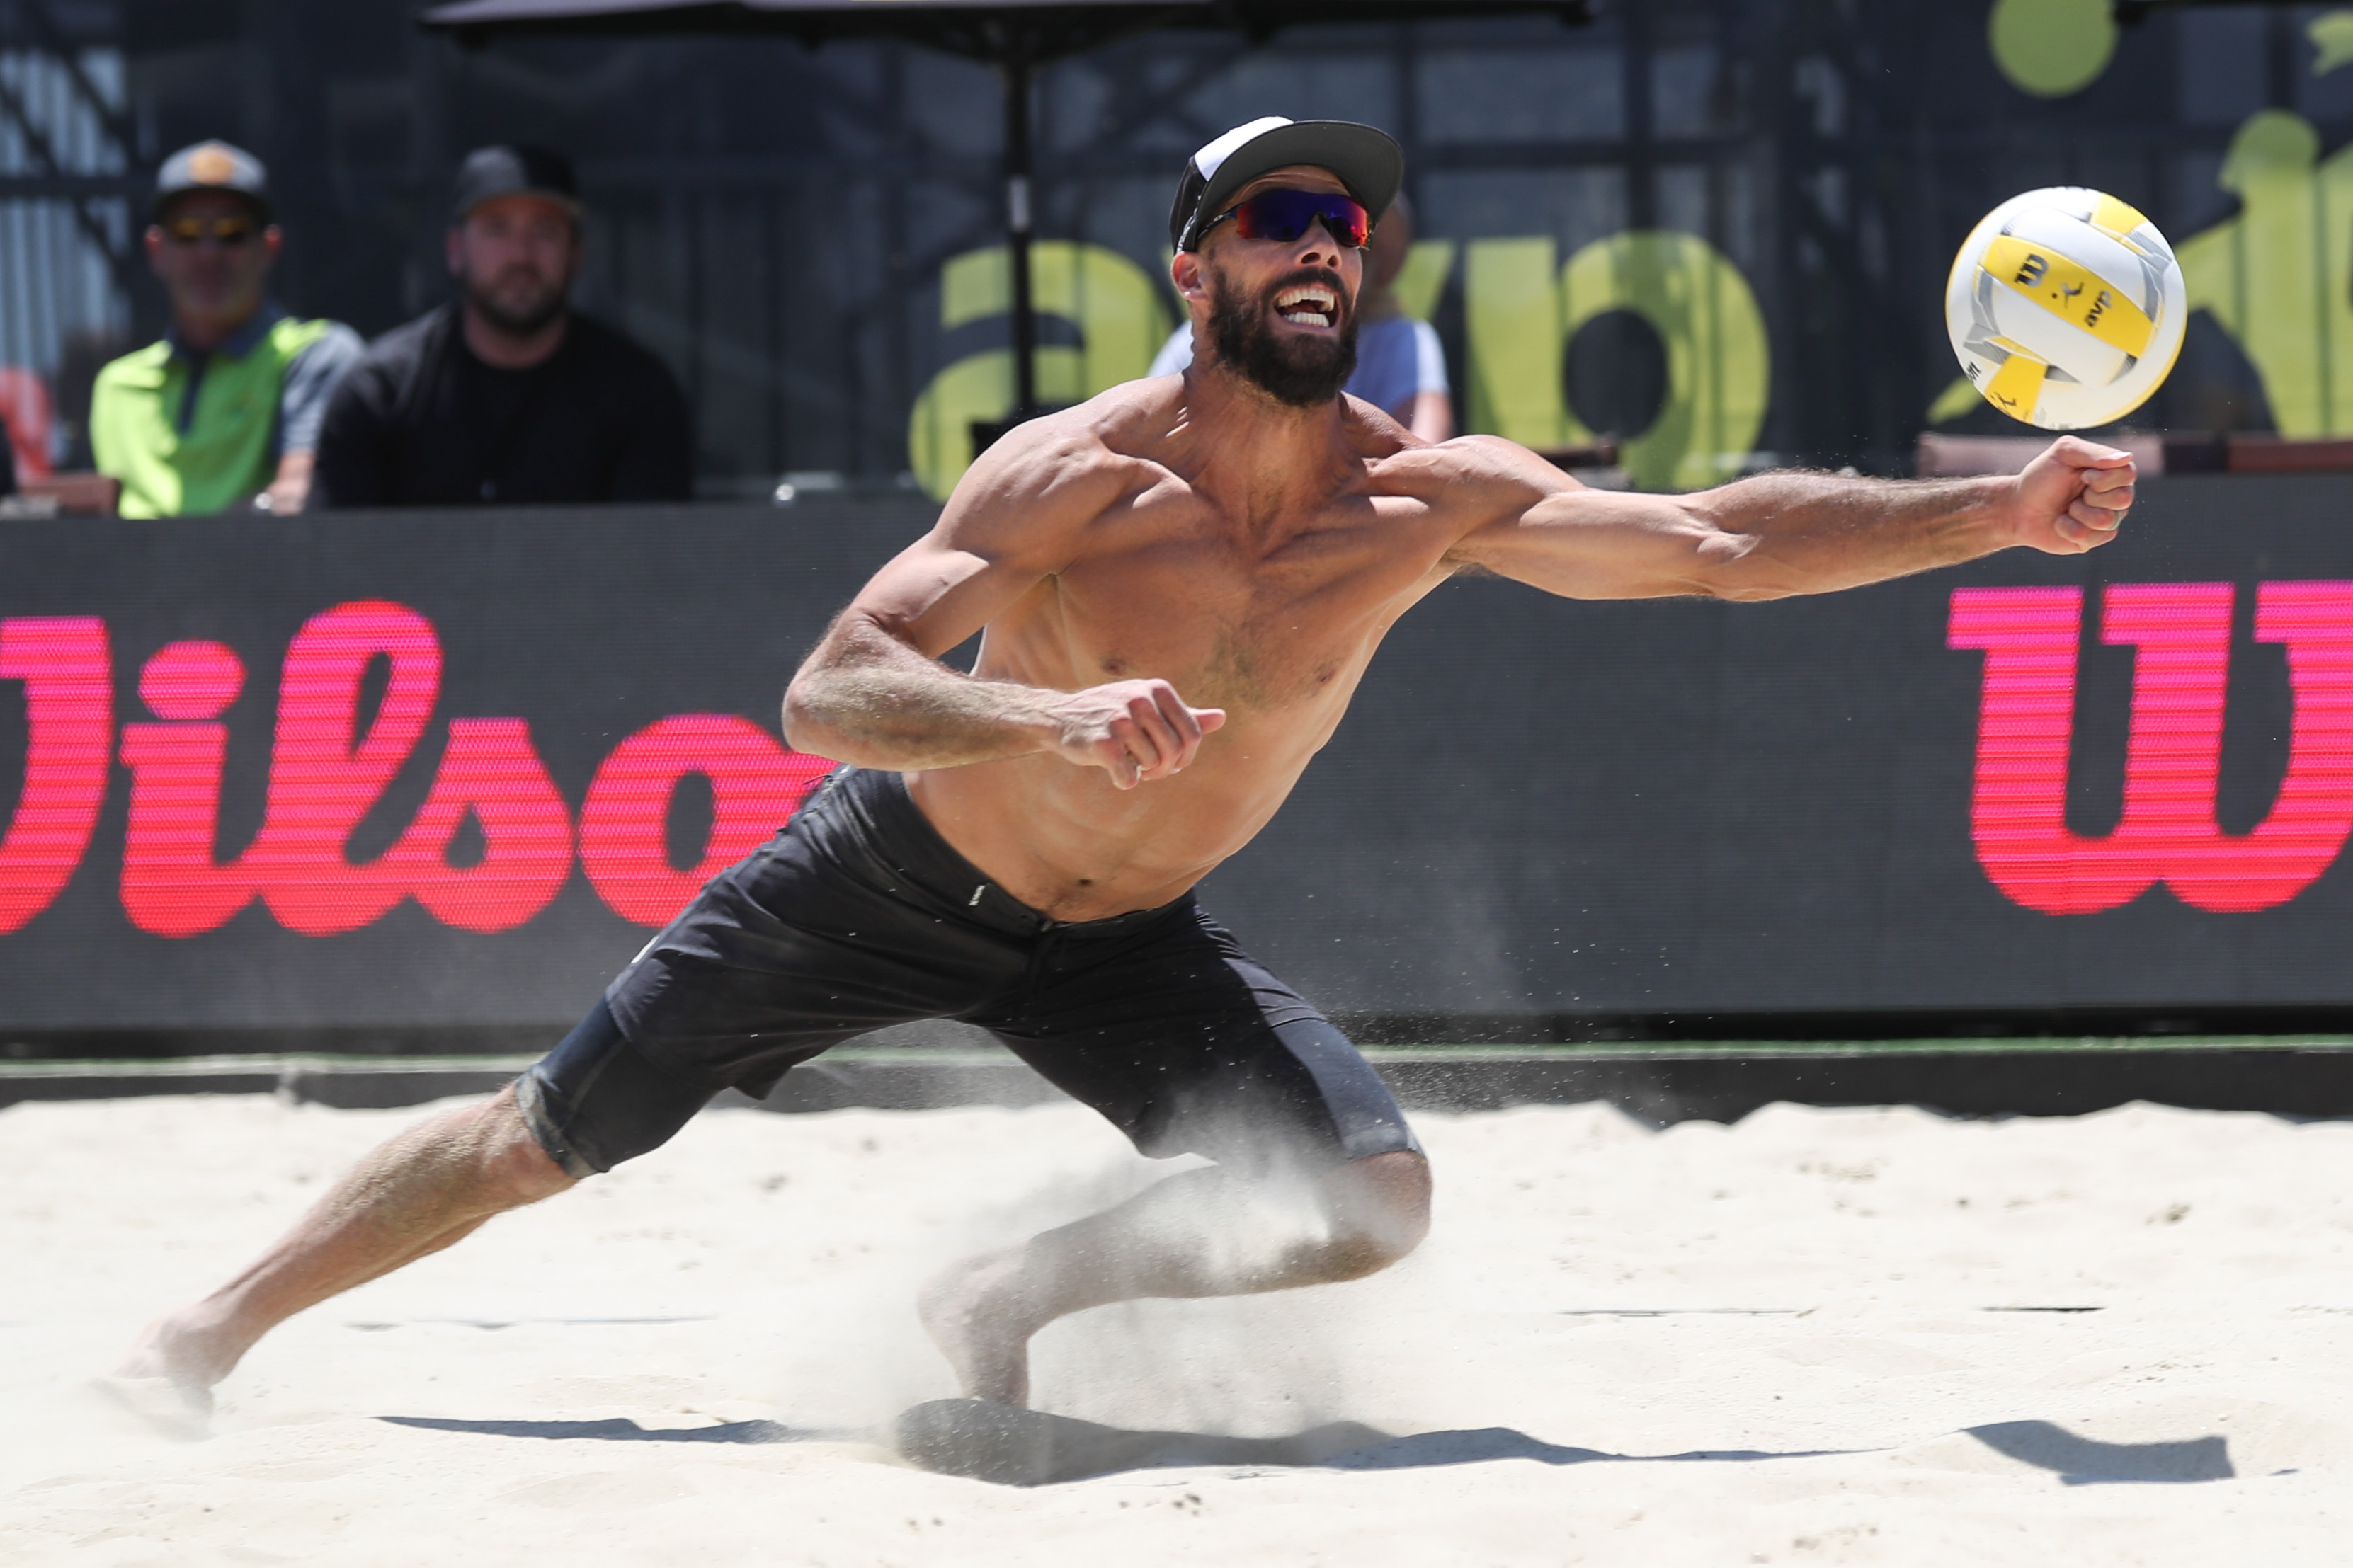 Reid Priddy What Is Your Warm Up Routine Avp Beach Volleyball